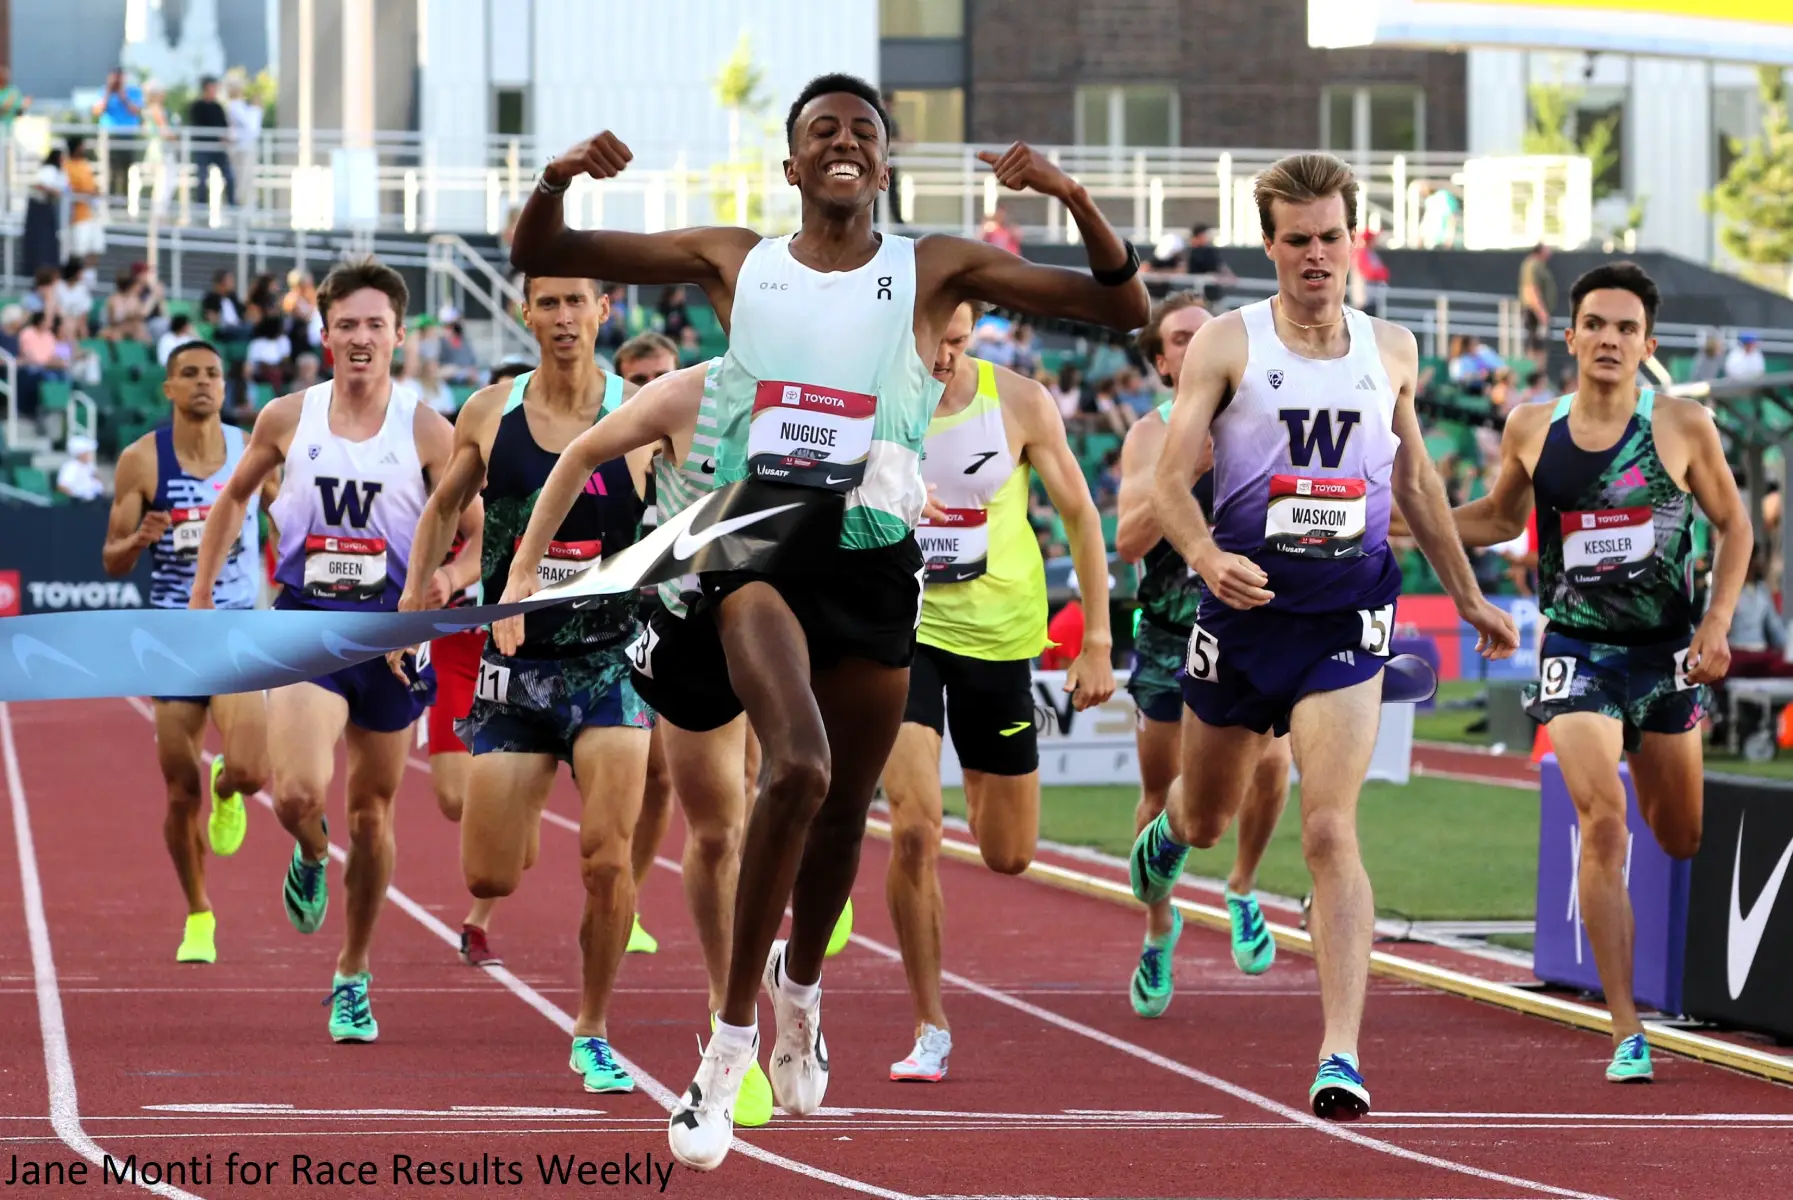 Yared Nuguse wins men's 1500m title at 2023 USATF Outdoor Championships